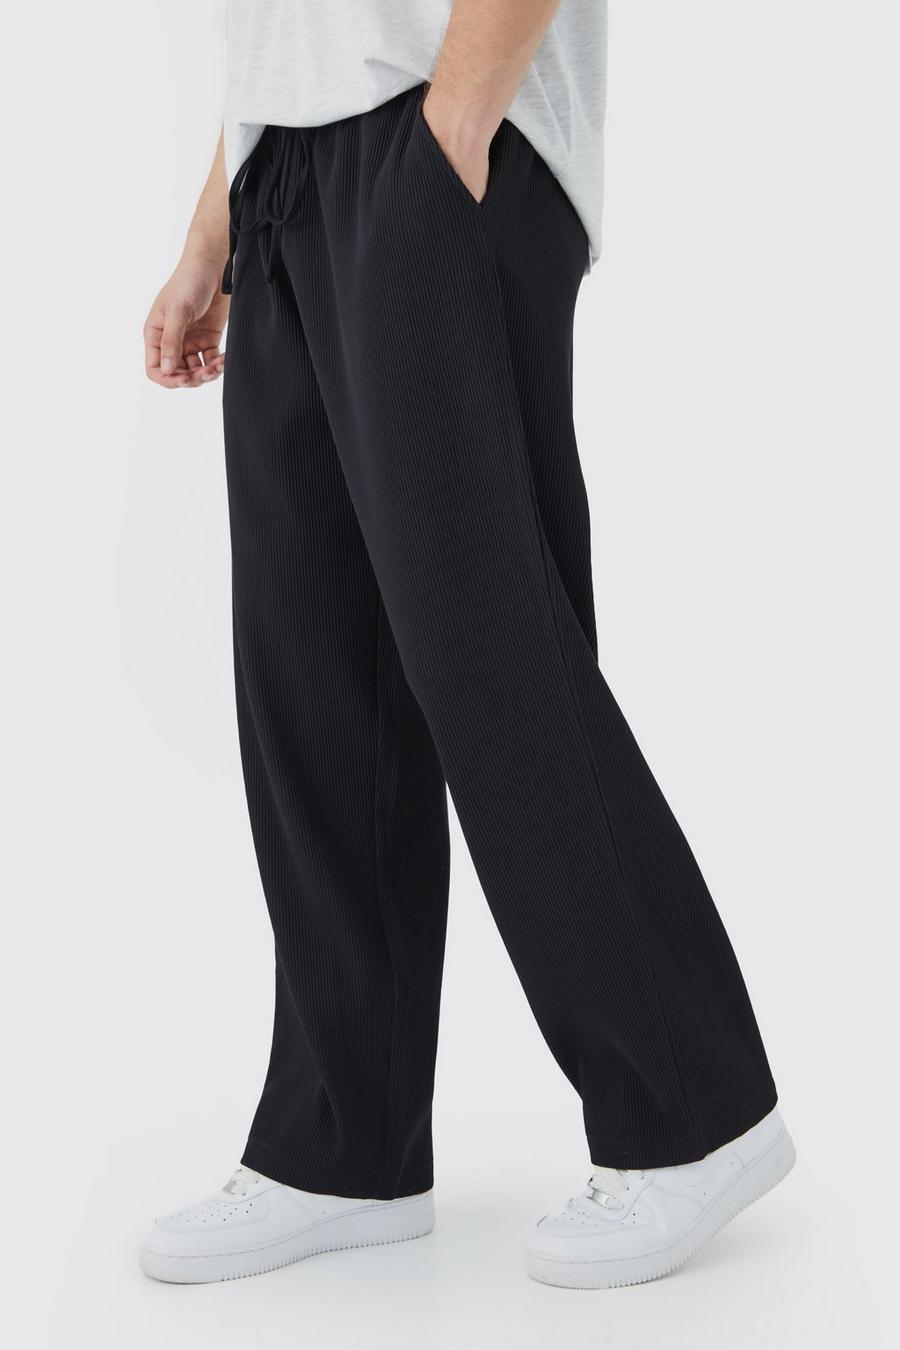 Black Tall Elastic Waist Relaxed Fit Cropped Pleated Trouser